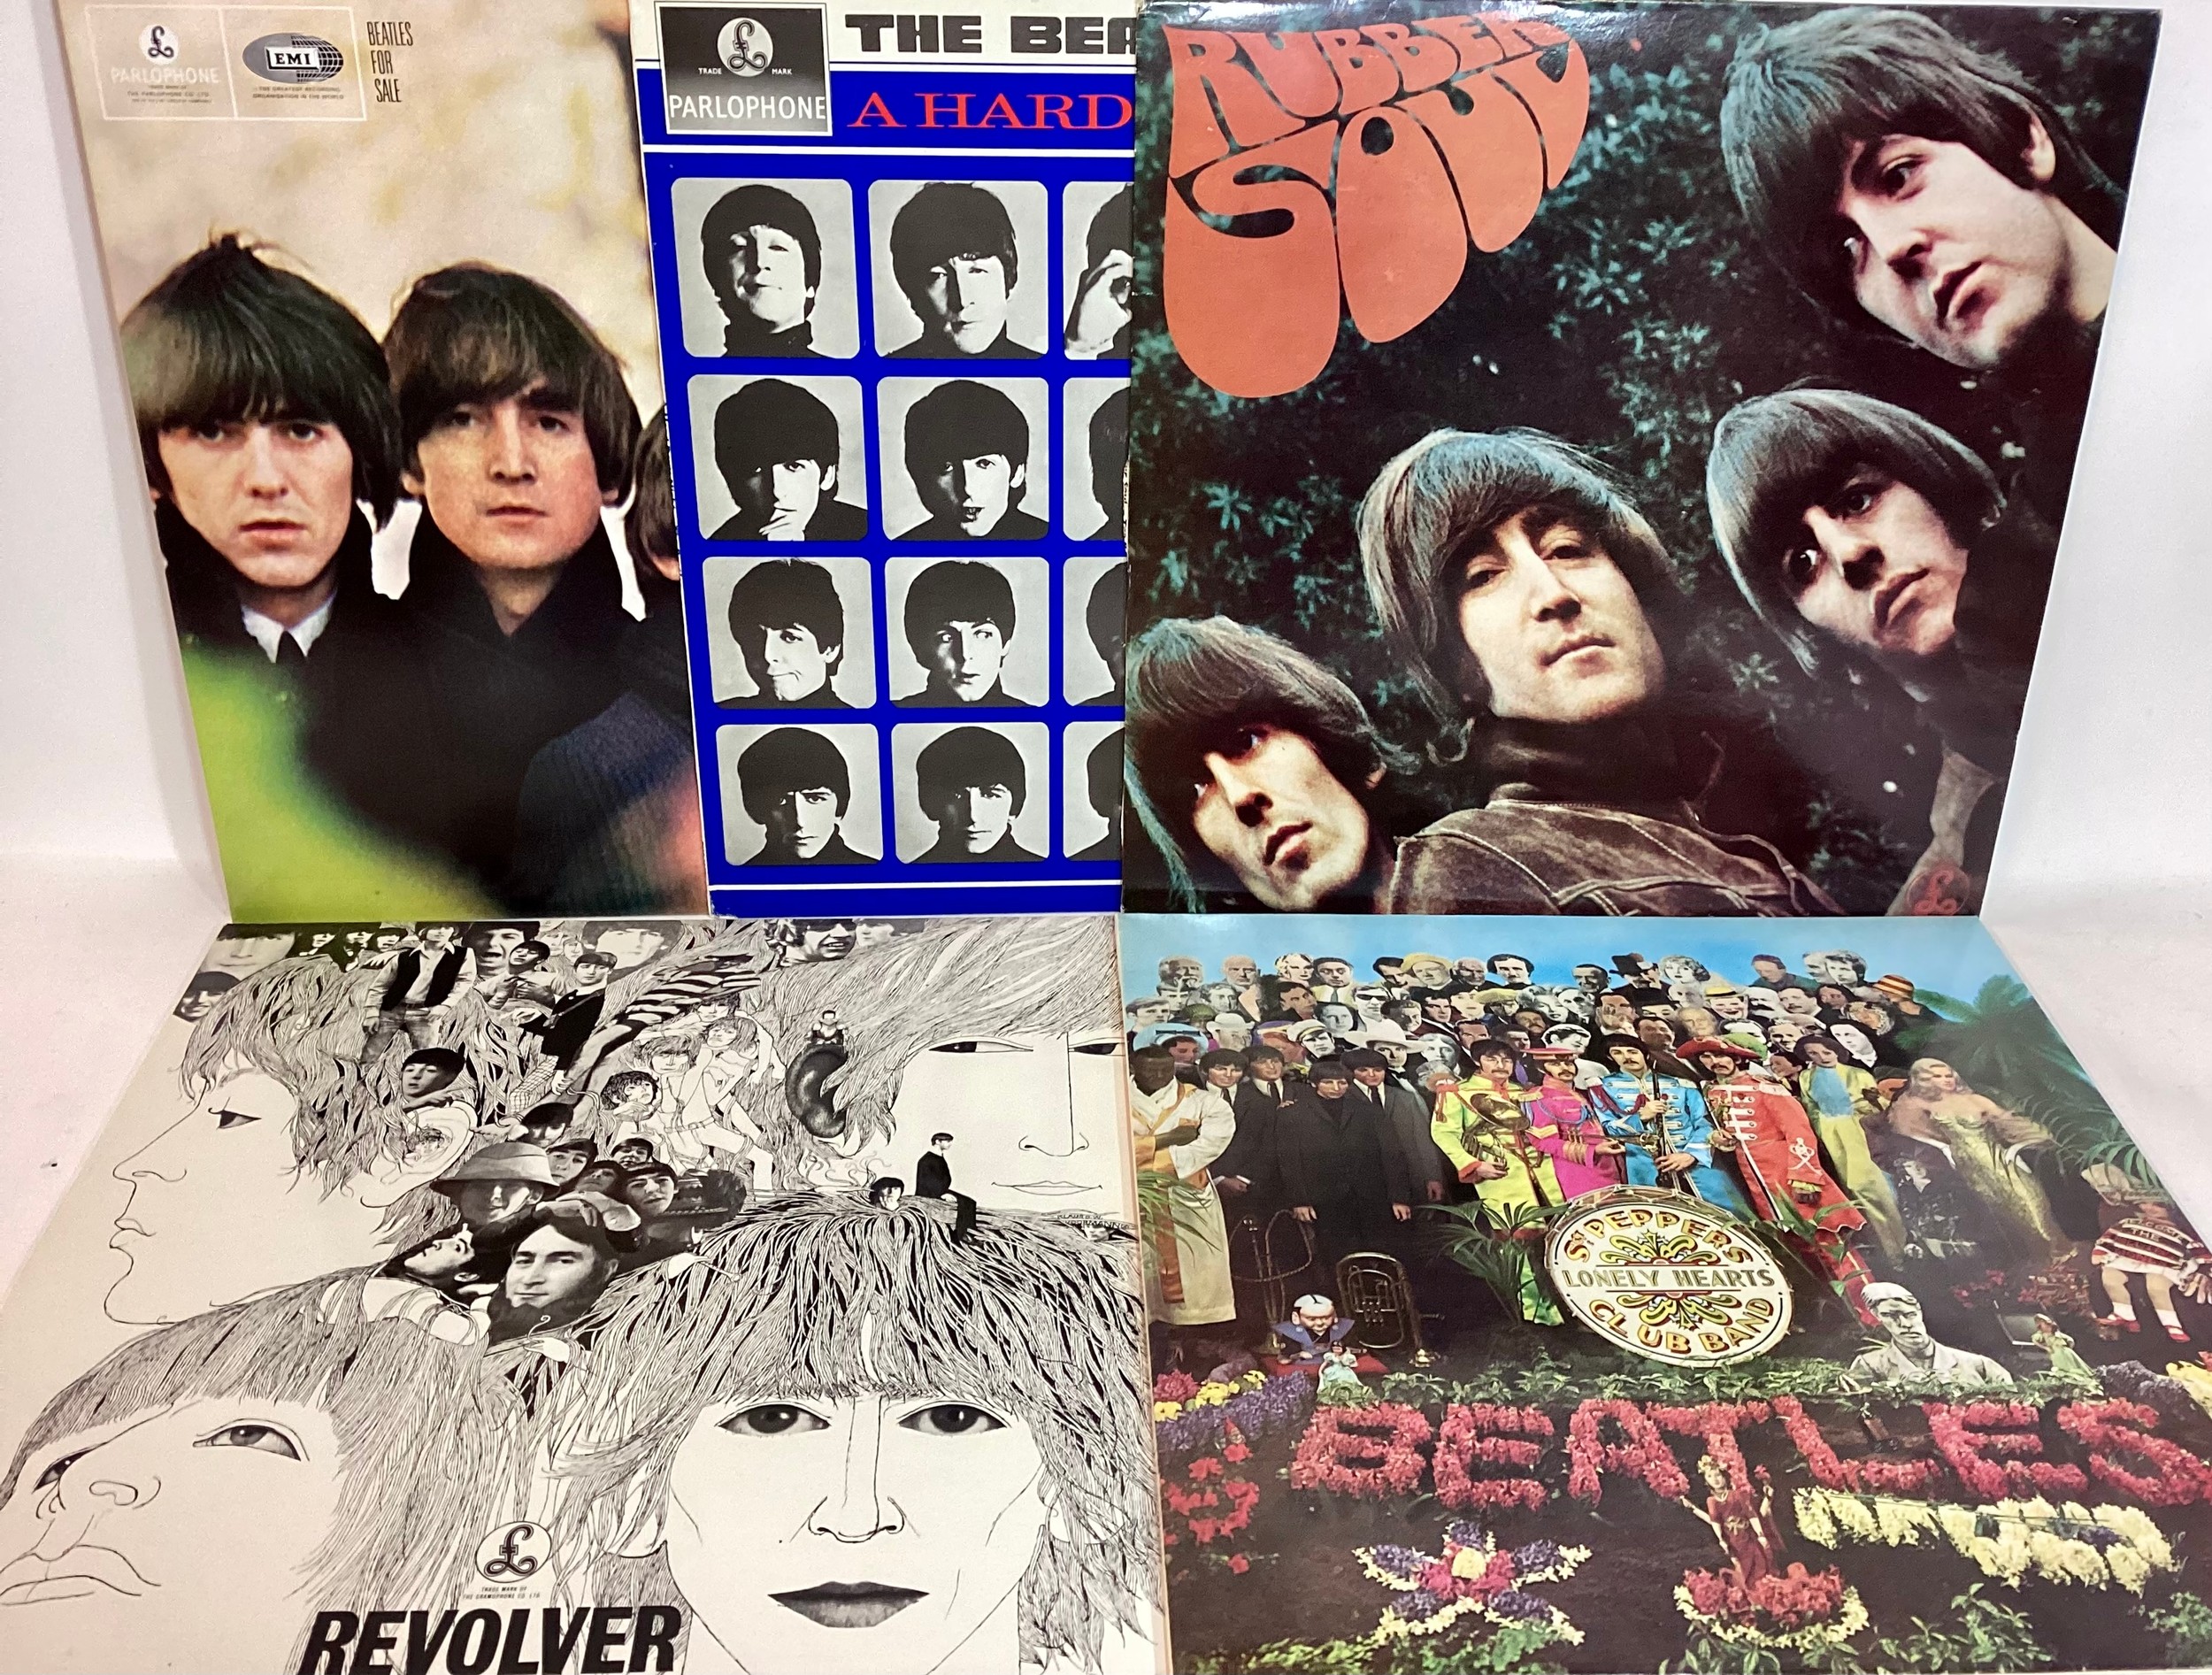 THE FAB FOUR COLLECTION (BEATLES) OF REISSUE VINYL RECORDS X 5. The Beatles albums here entitled -